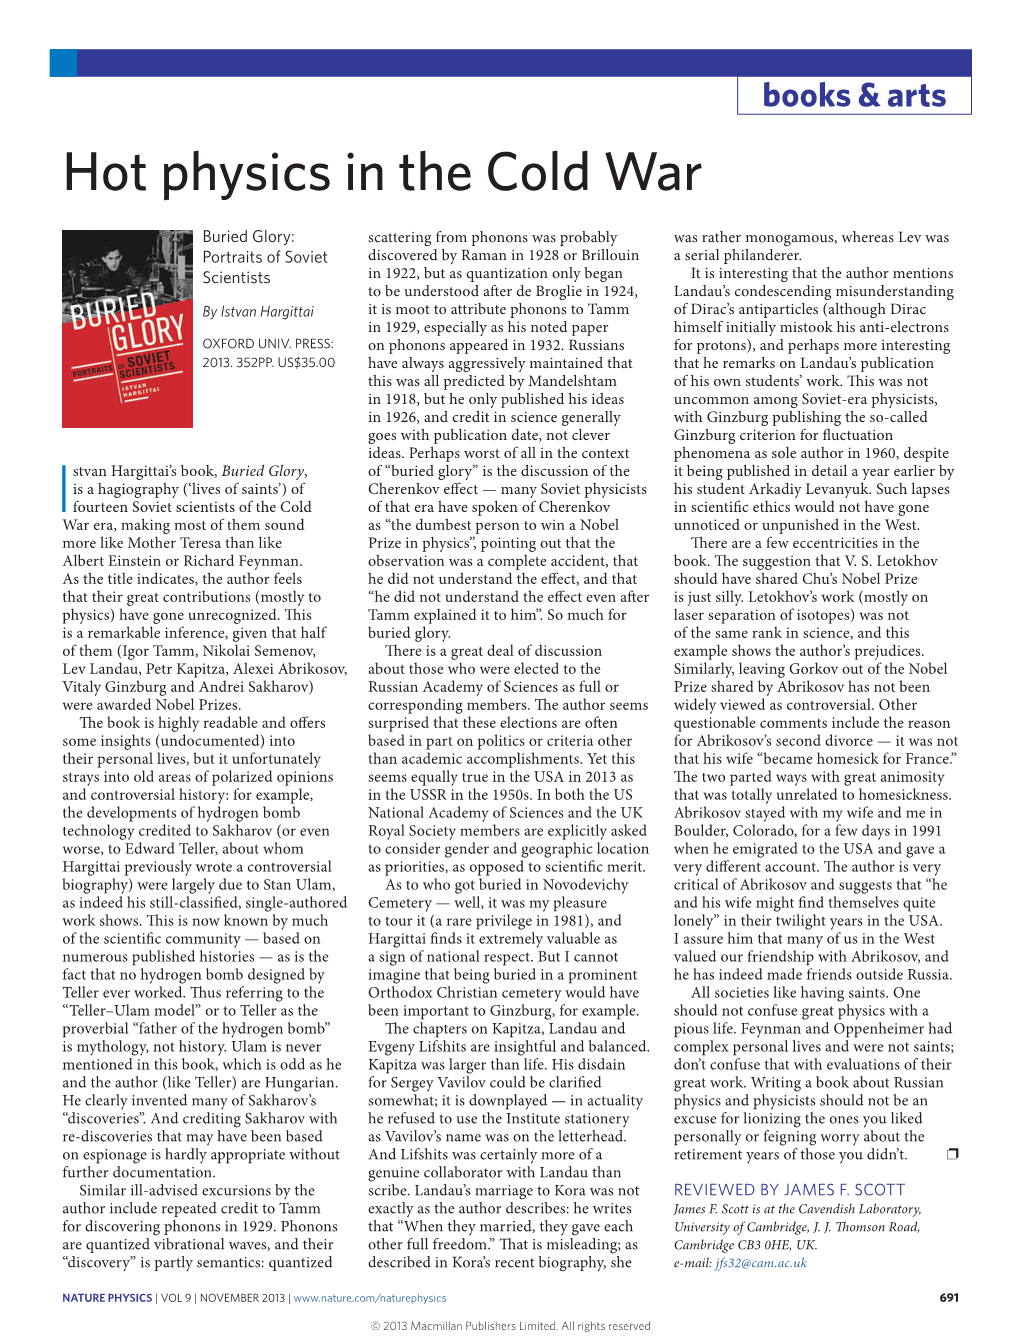 Hot Physics in the Cold War